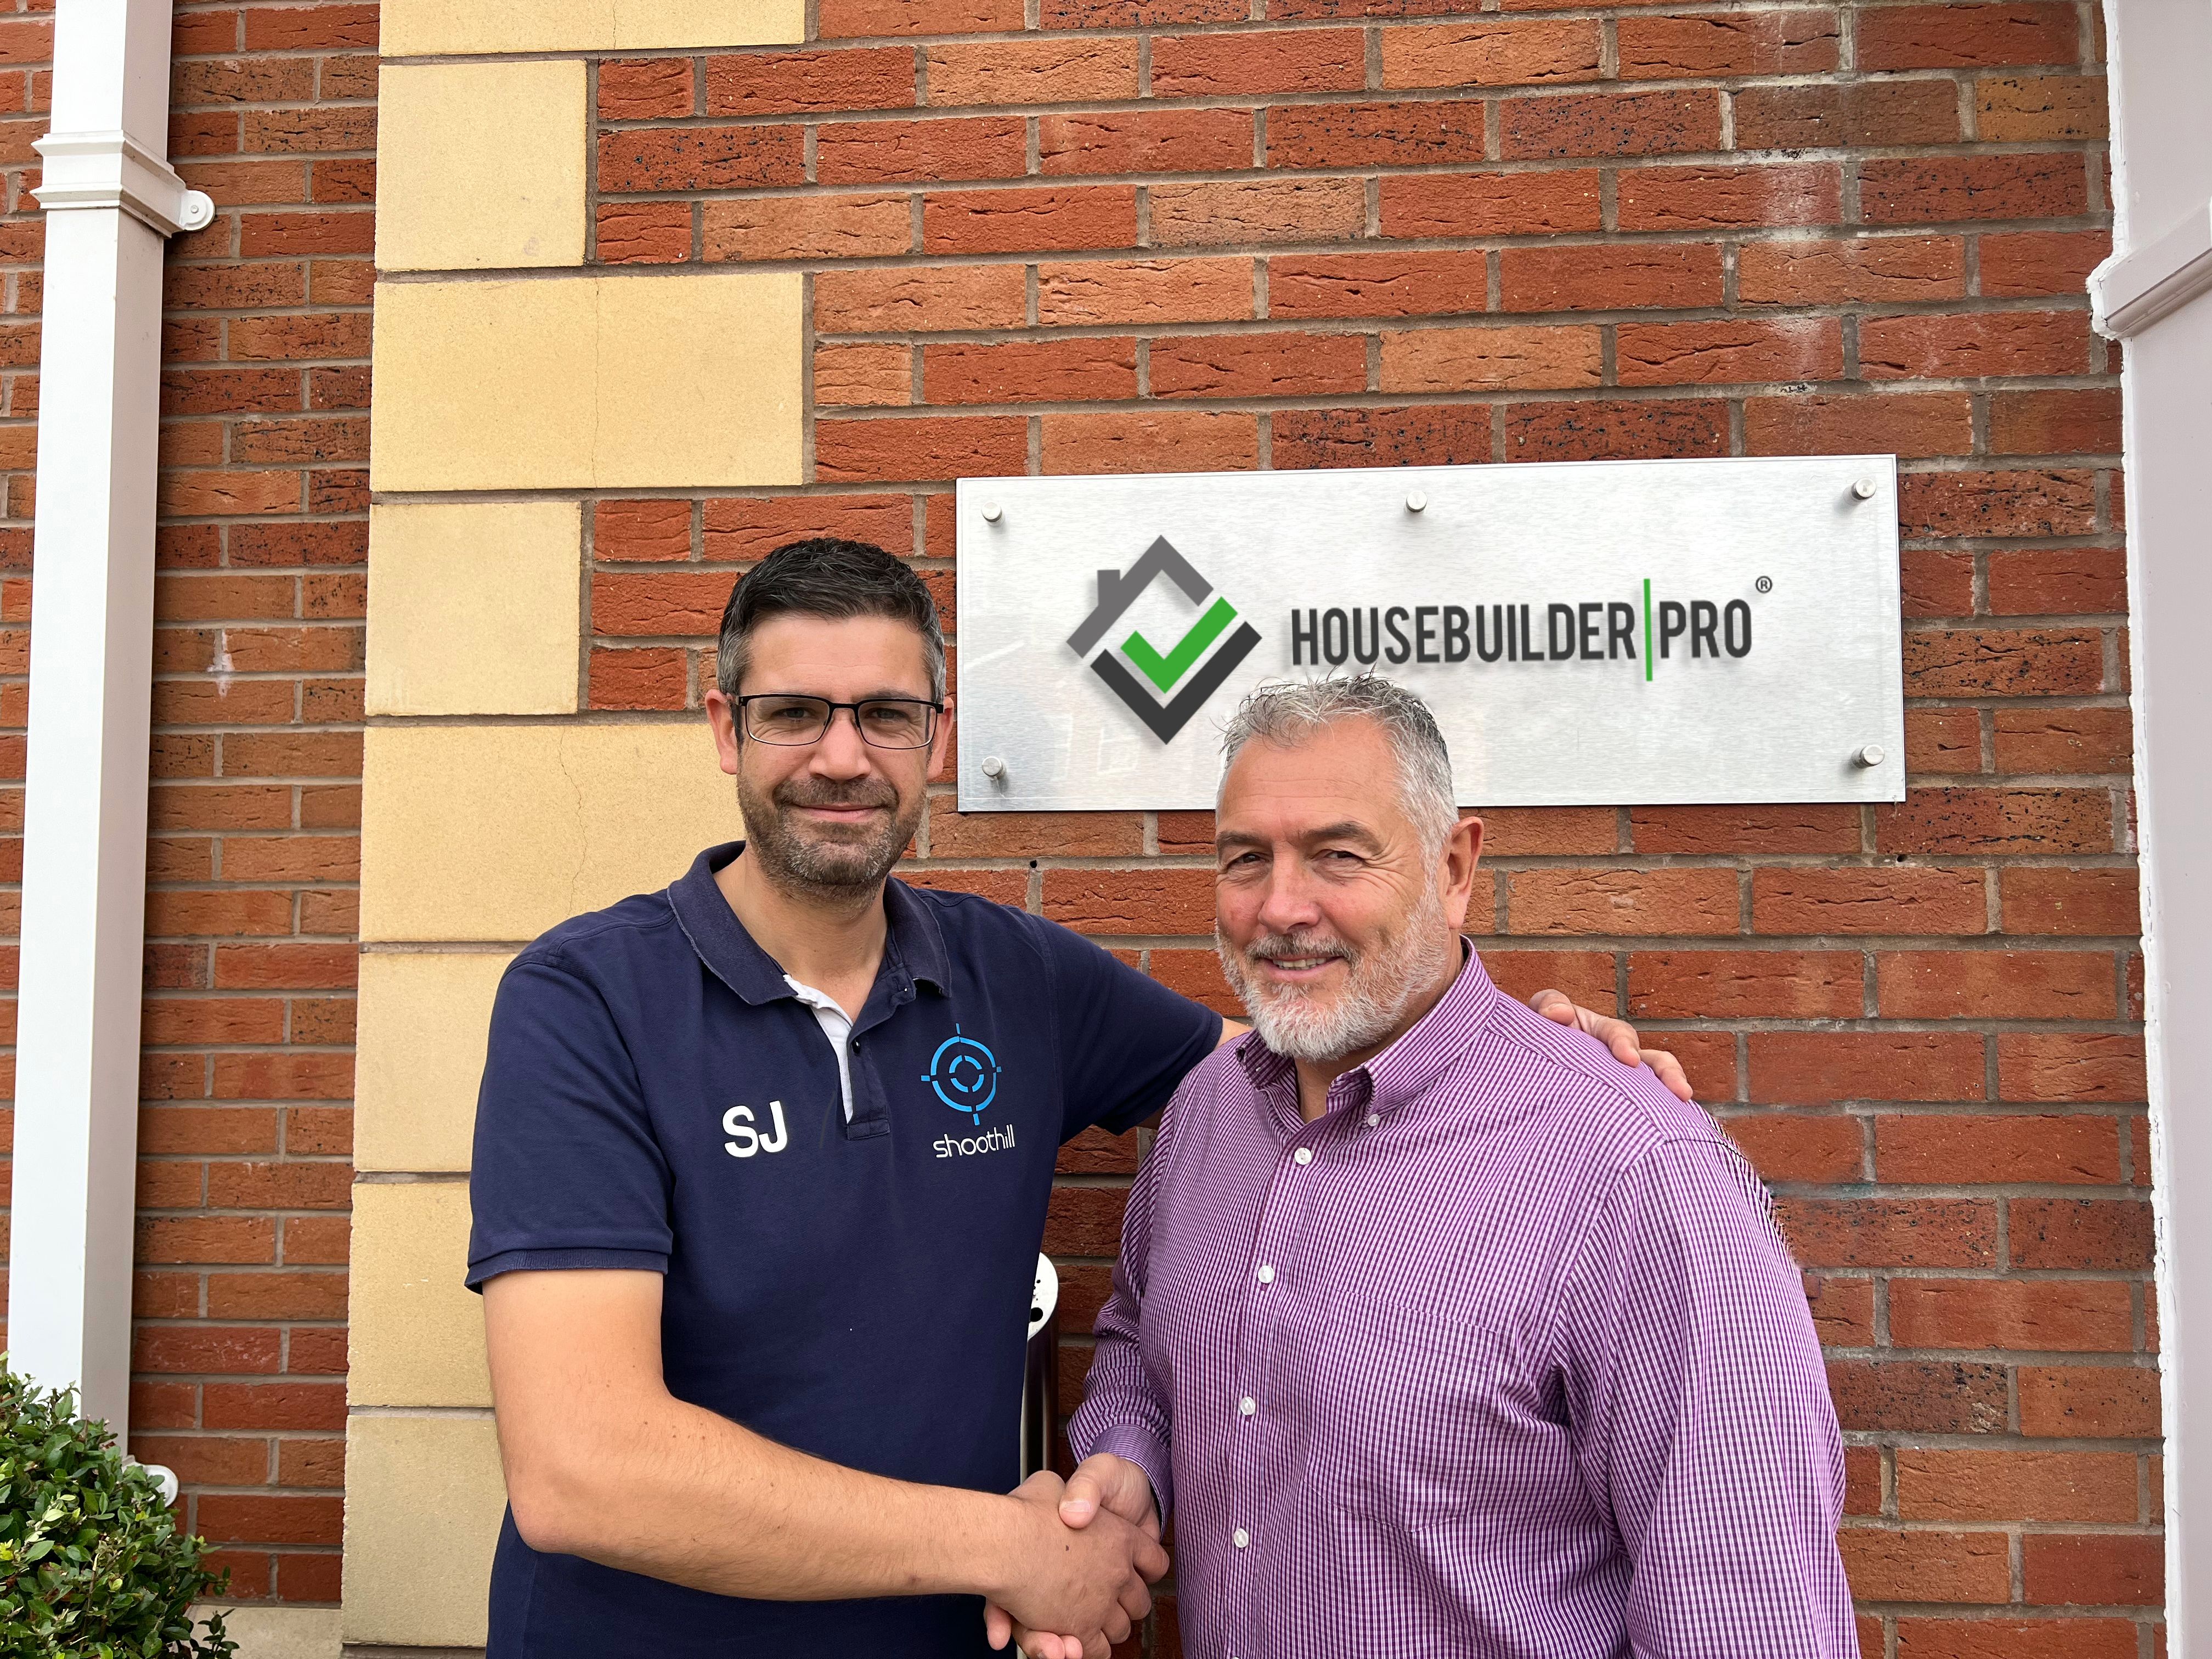 Housebuilder Pro's Nick Taylor promoted to Sales Director